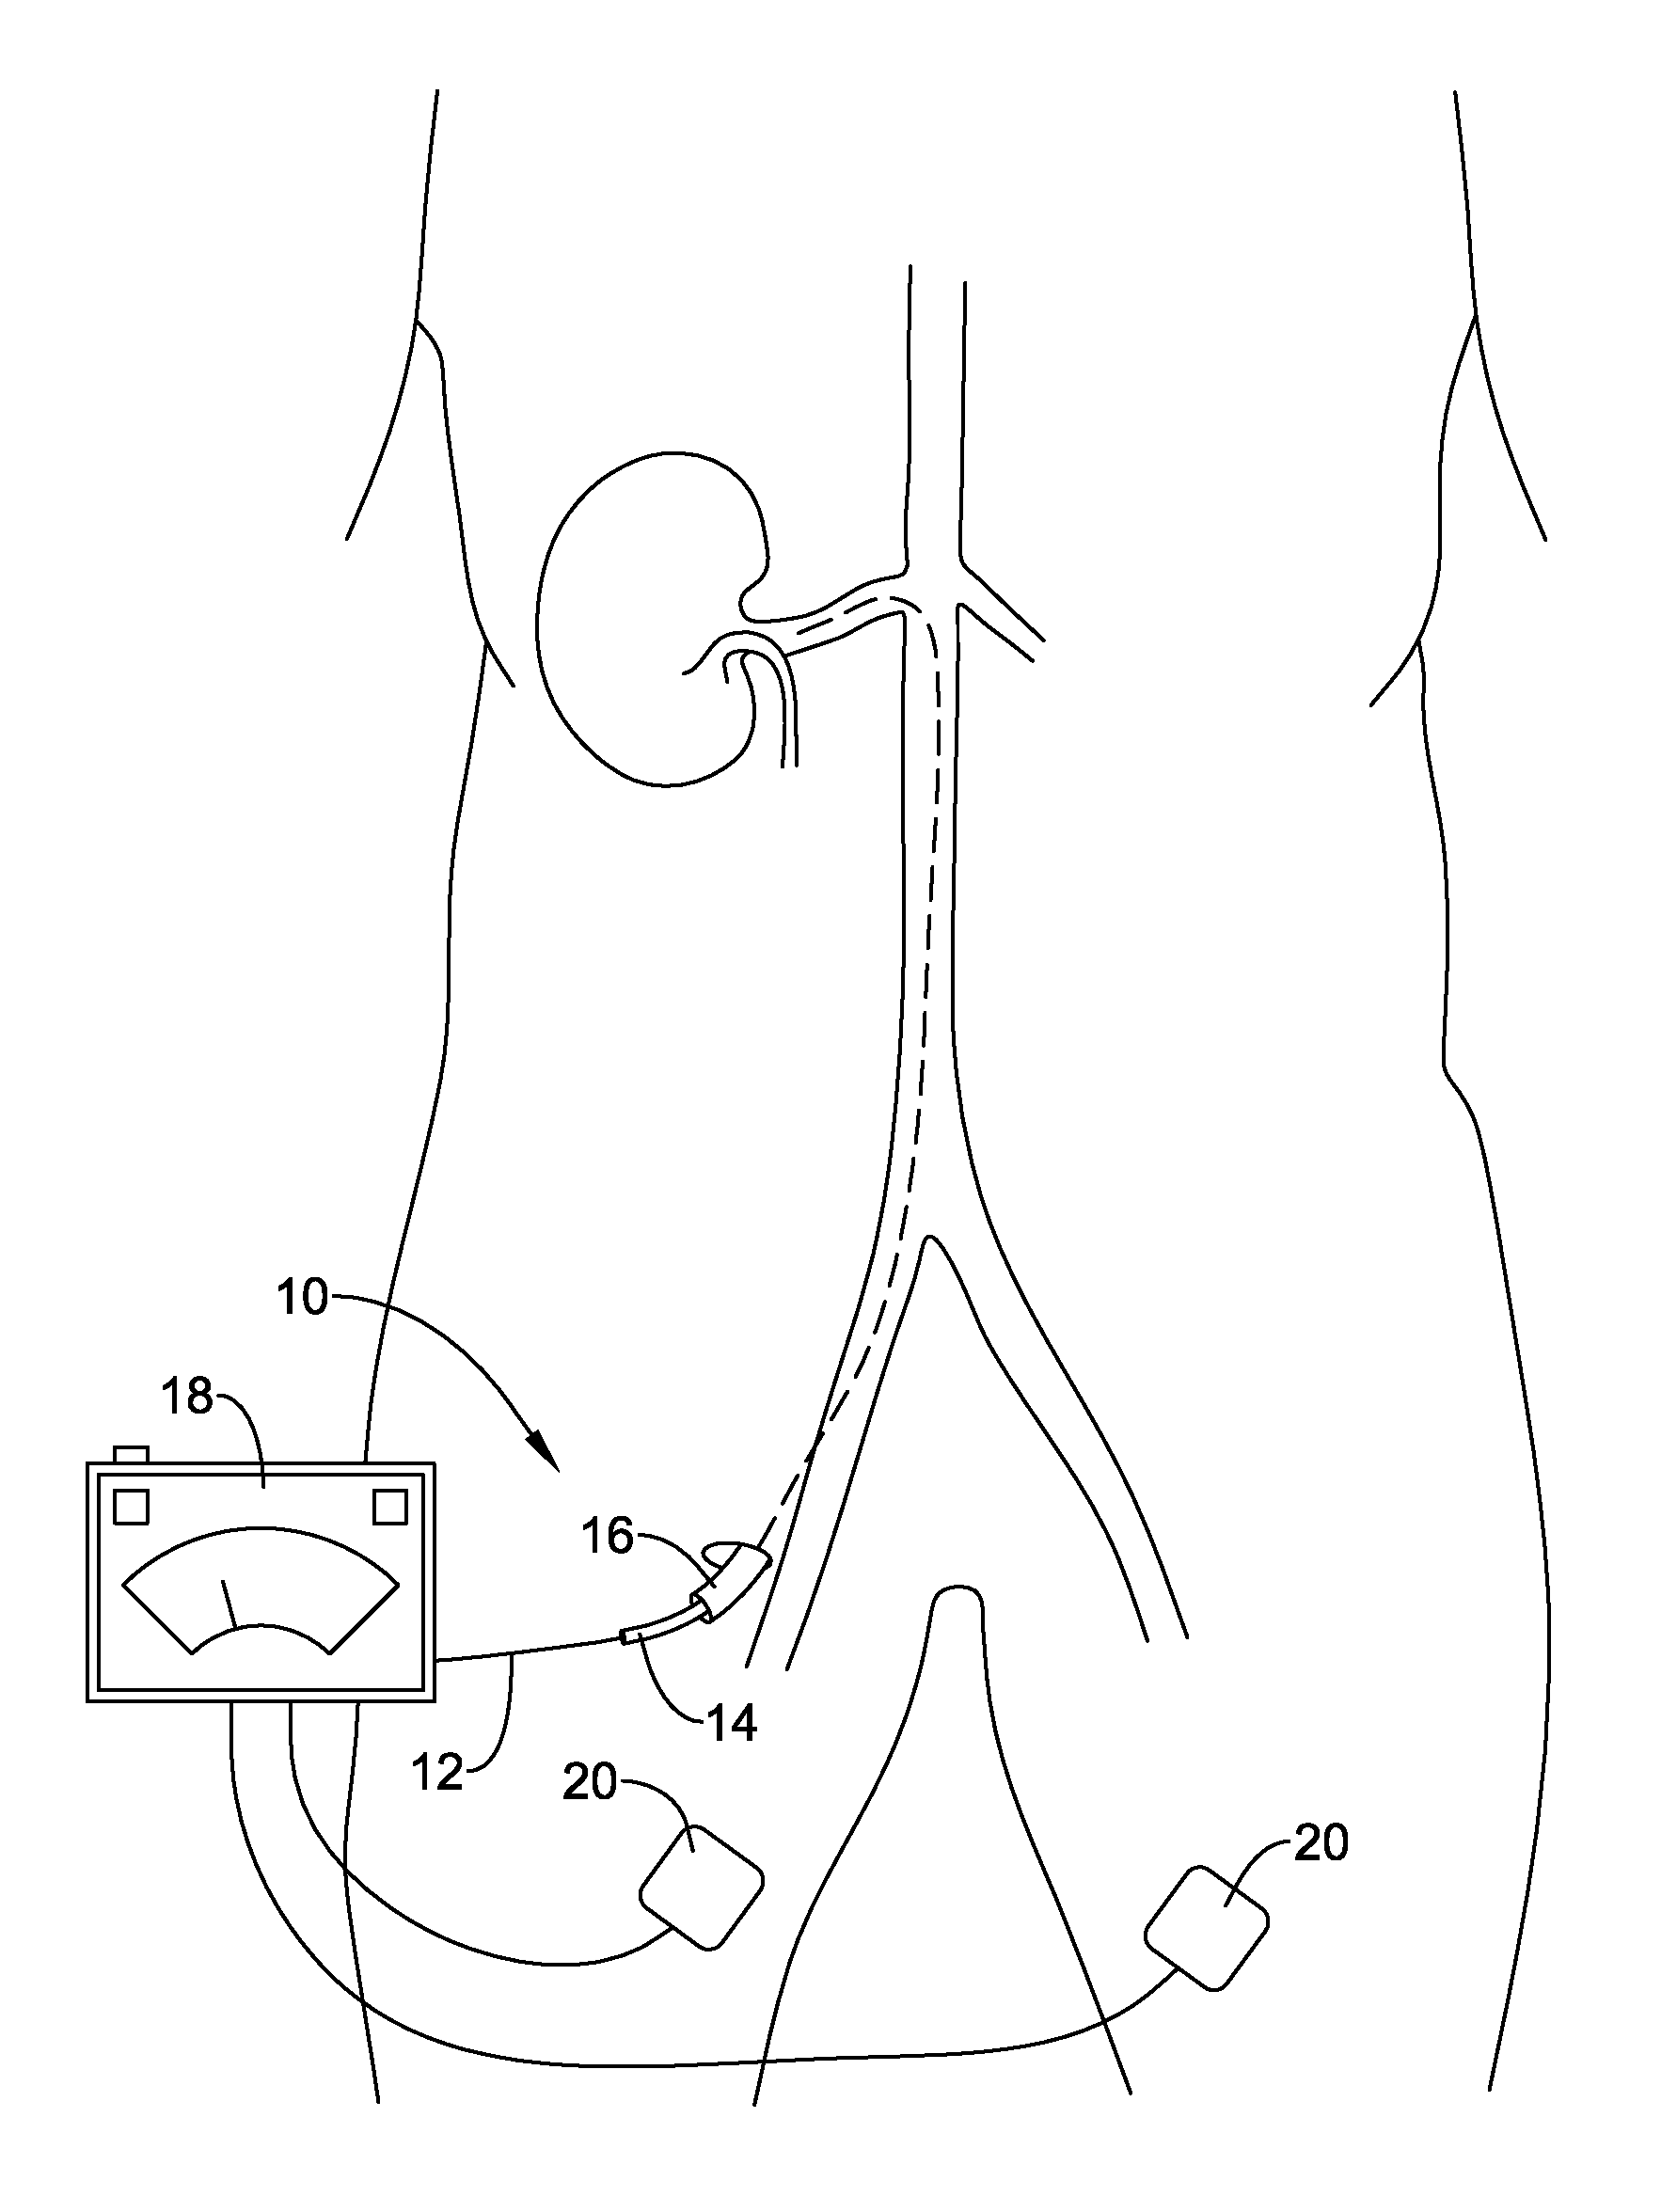 Device and methods for renal nerve modulation